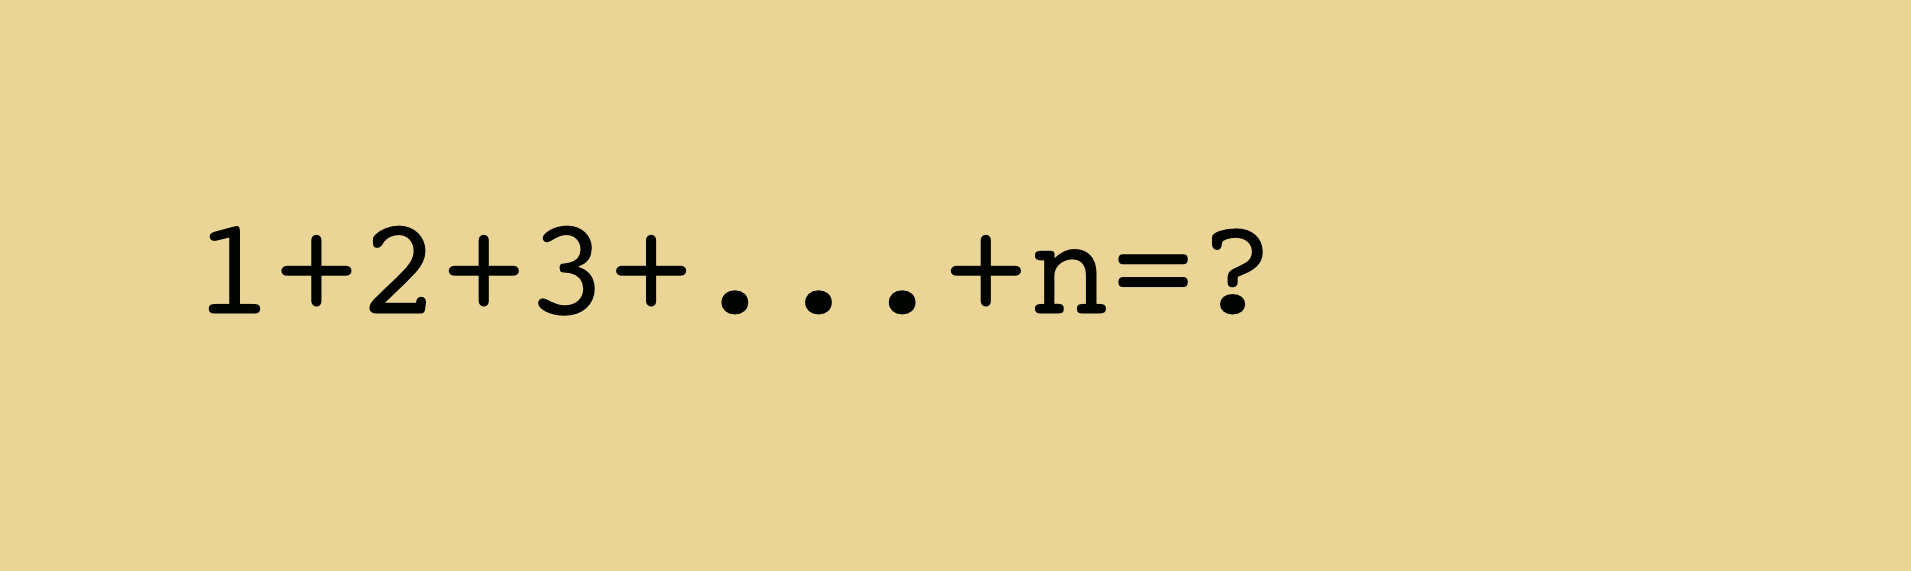 Animated_proof_for_the_formula_giving_the_sum_of_the_first_integers_1+2+...+n.gif